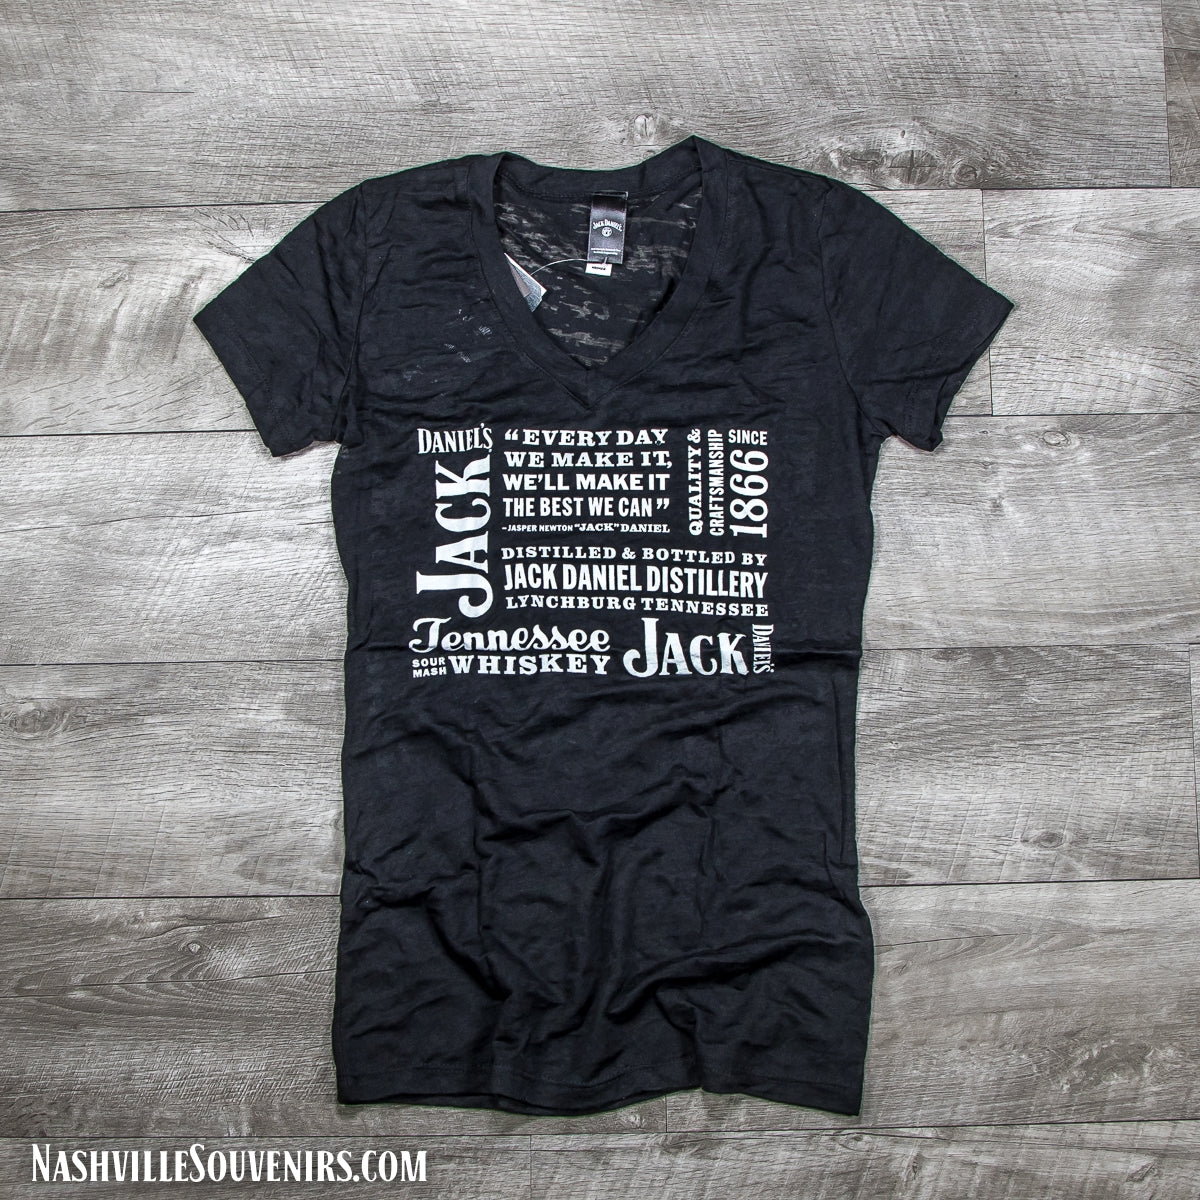 Officially licensed ladies Jack Daniels Slogan's Burnout V-Neck T-Shirt in black. Get yours today with FREE SHIPPING on all US orders over $75!